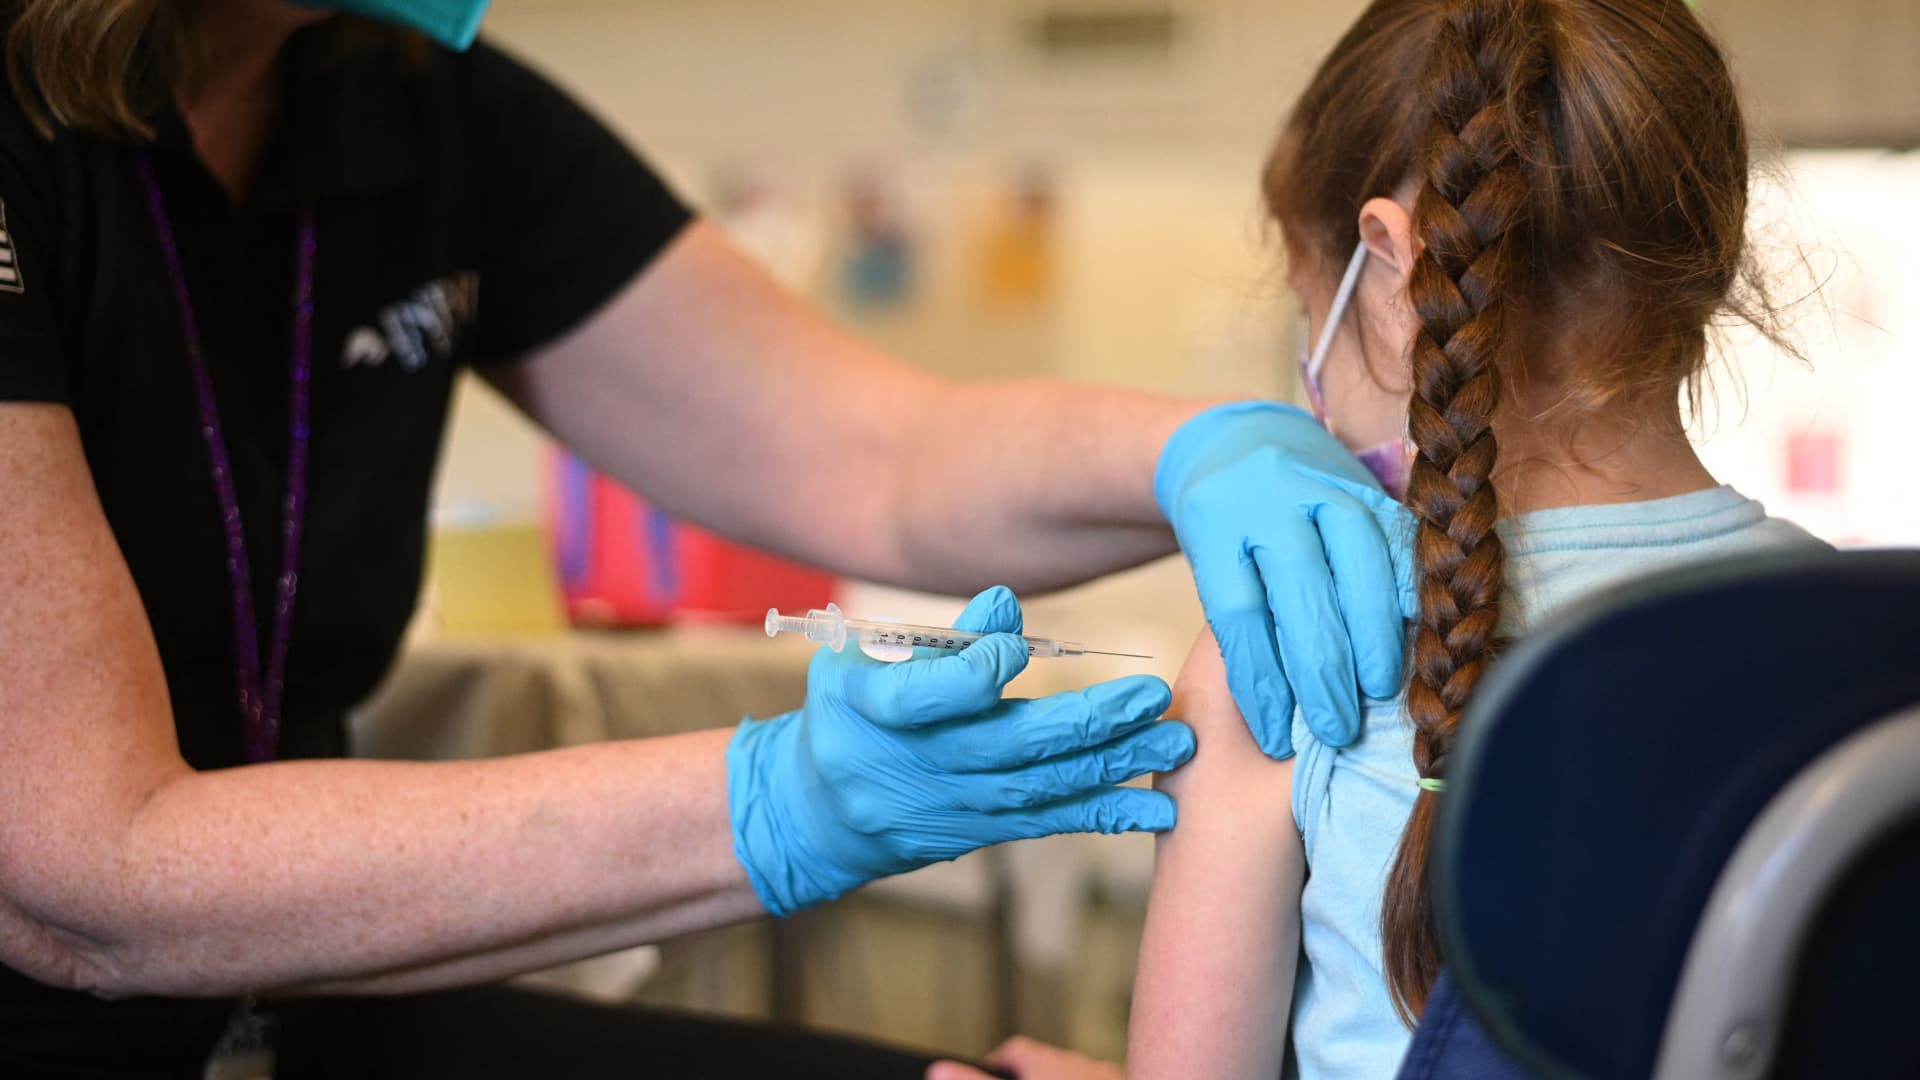 A nurse administers a pediatric dose of the Covid-19 vaccine to a girl at a L.A. Care Health Plan vaccination clinic at Los Angeles Mission College in the Sylmar neighborhood in Los Angeles, California, January 19, 2022.